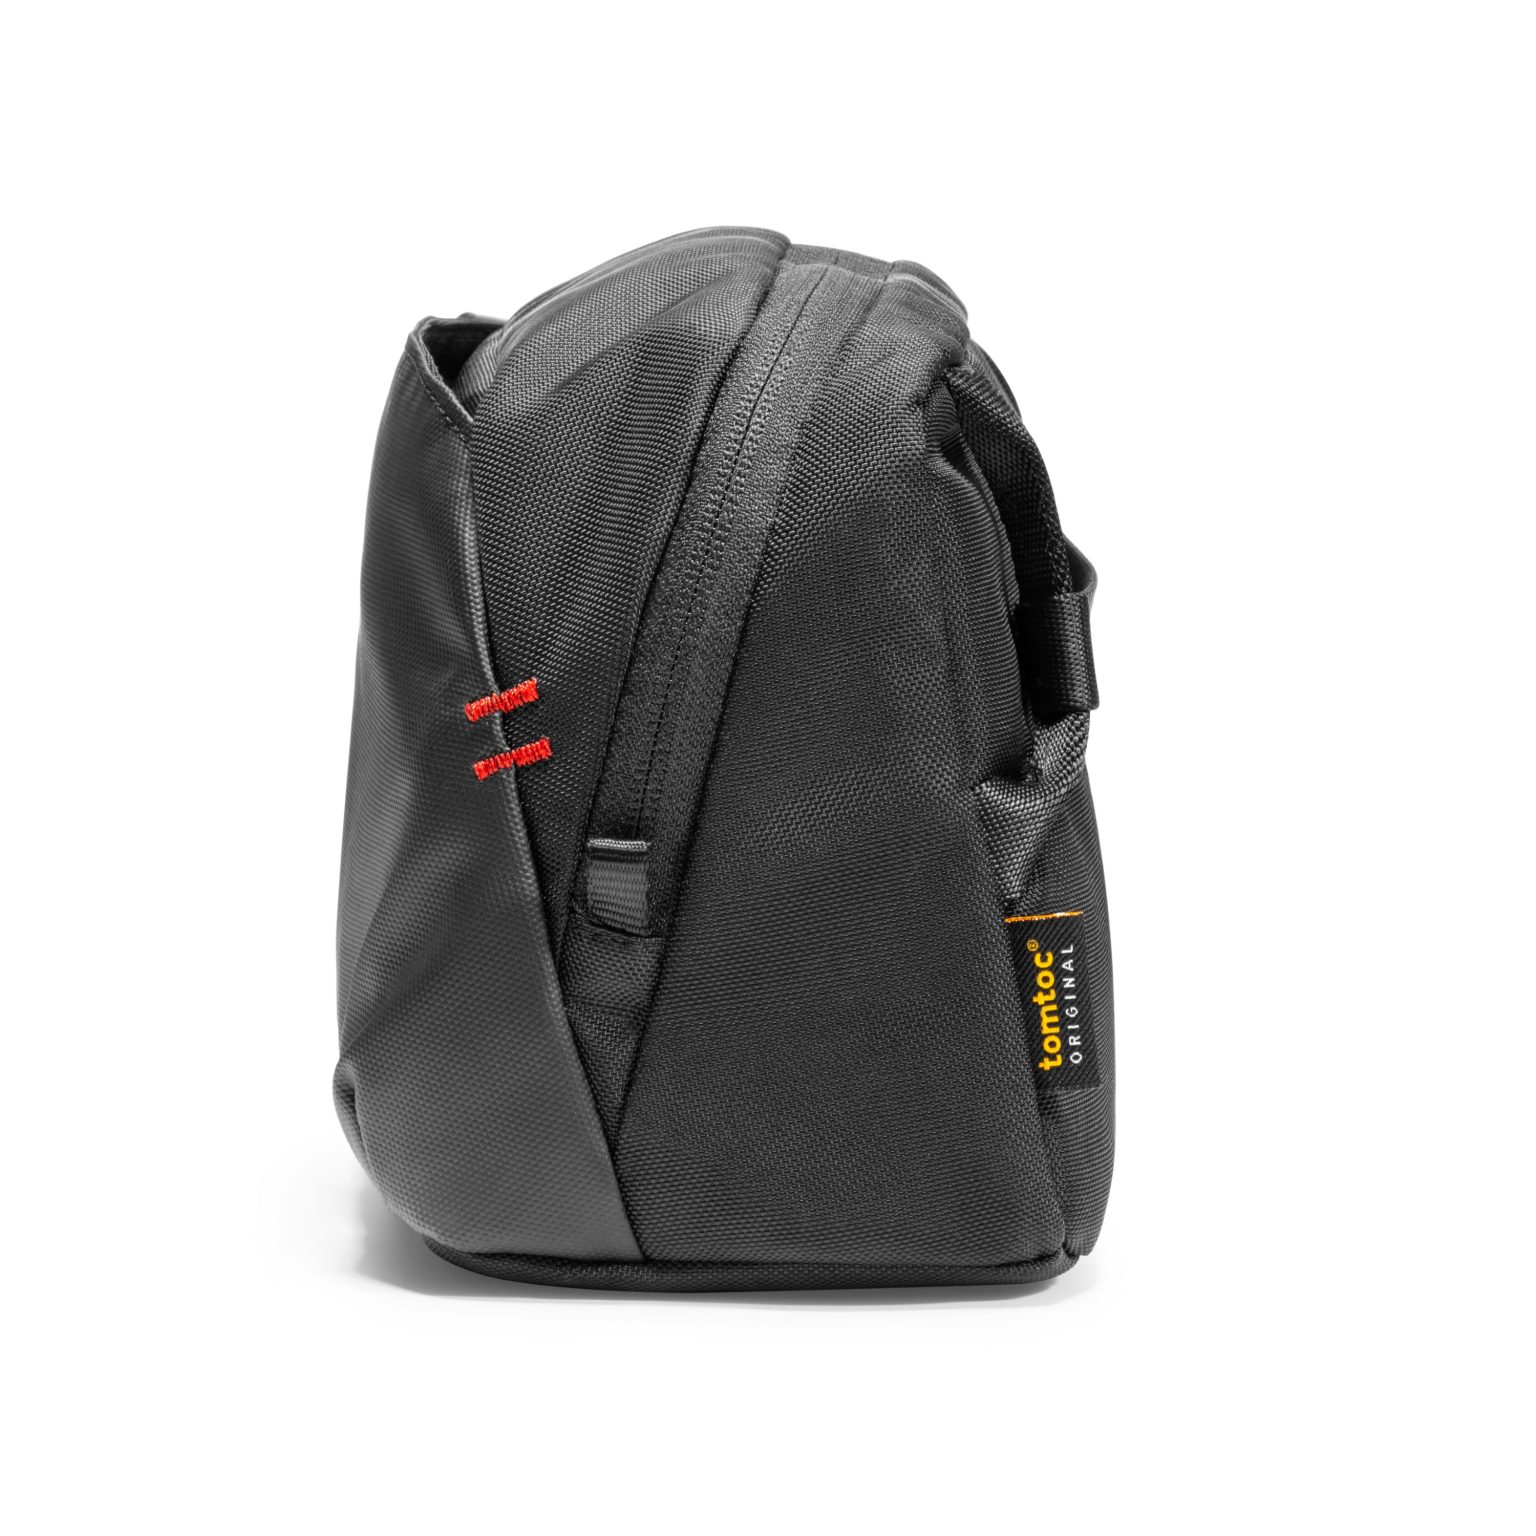 tomtoc Arccos Carrying Bag for Valve Steam Deck Console and Accessories